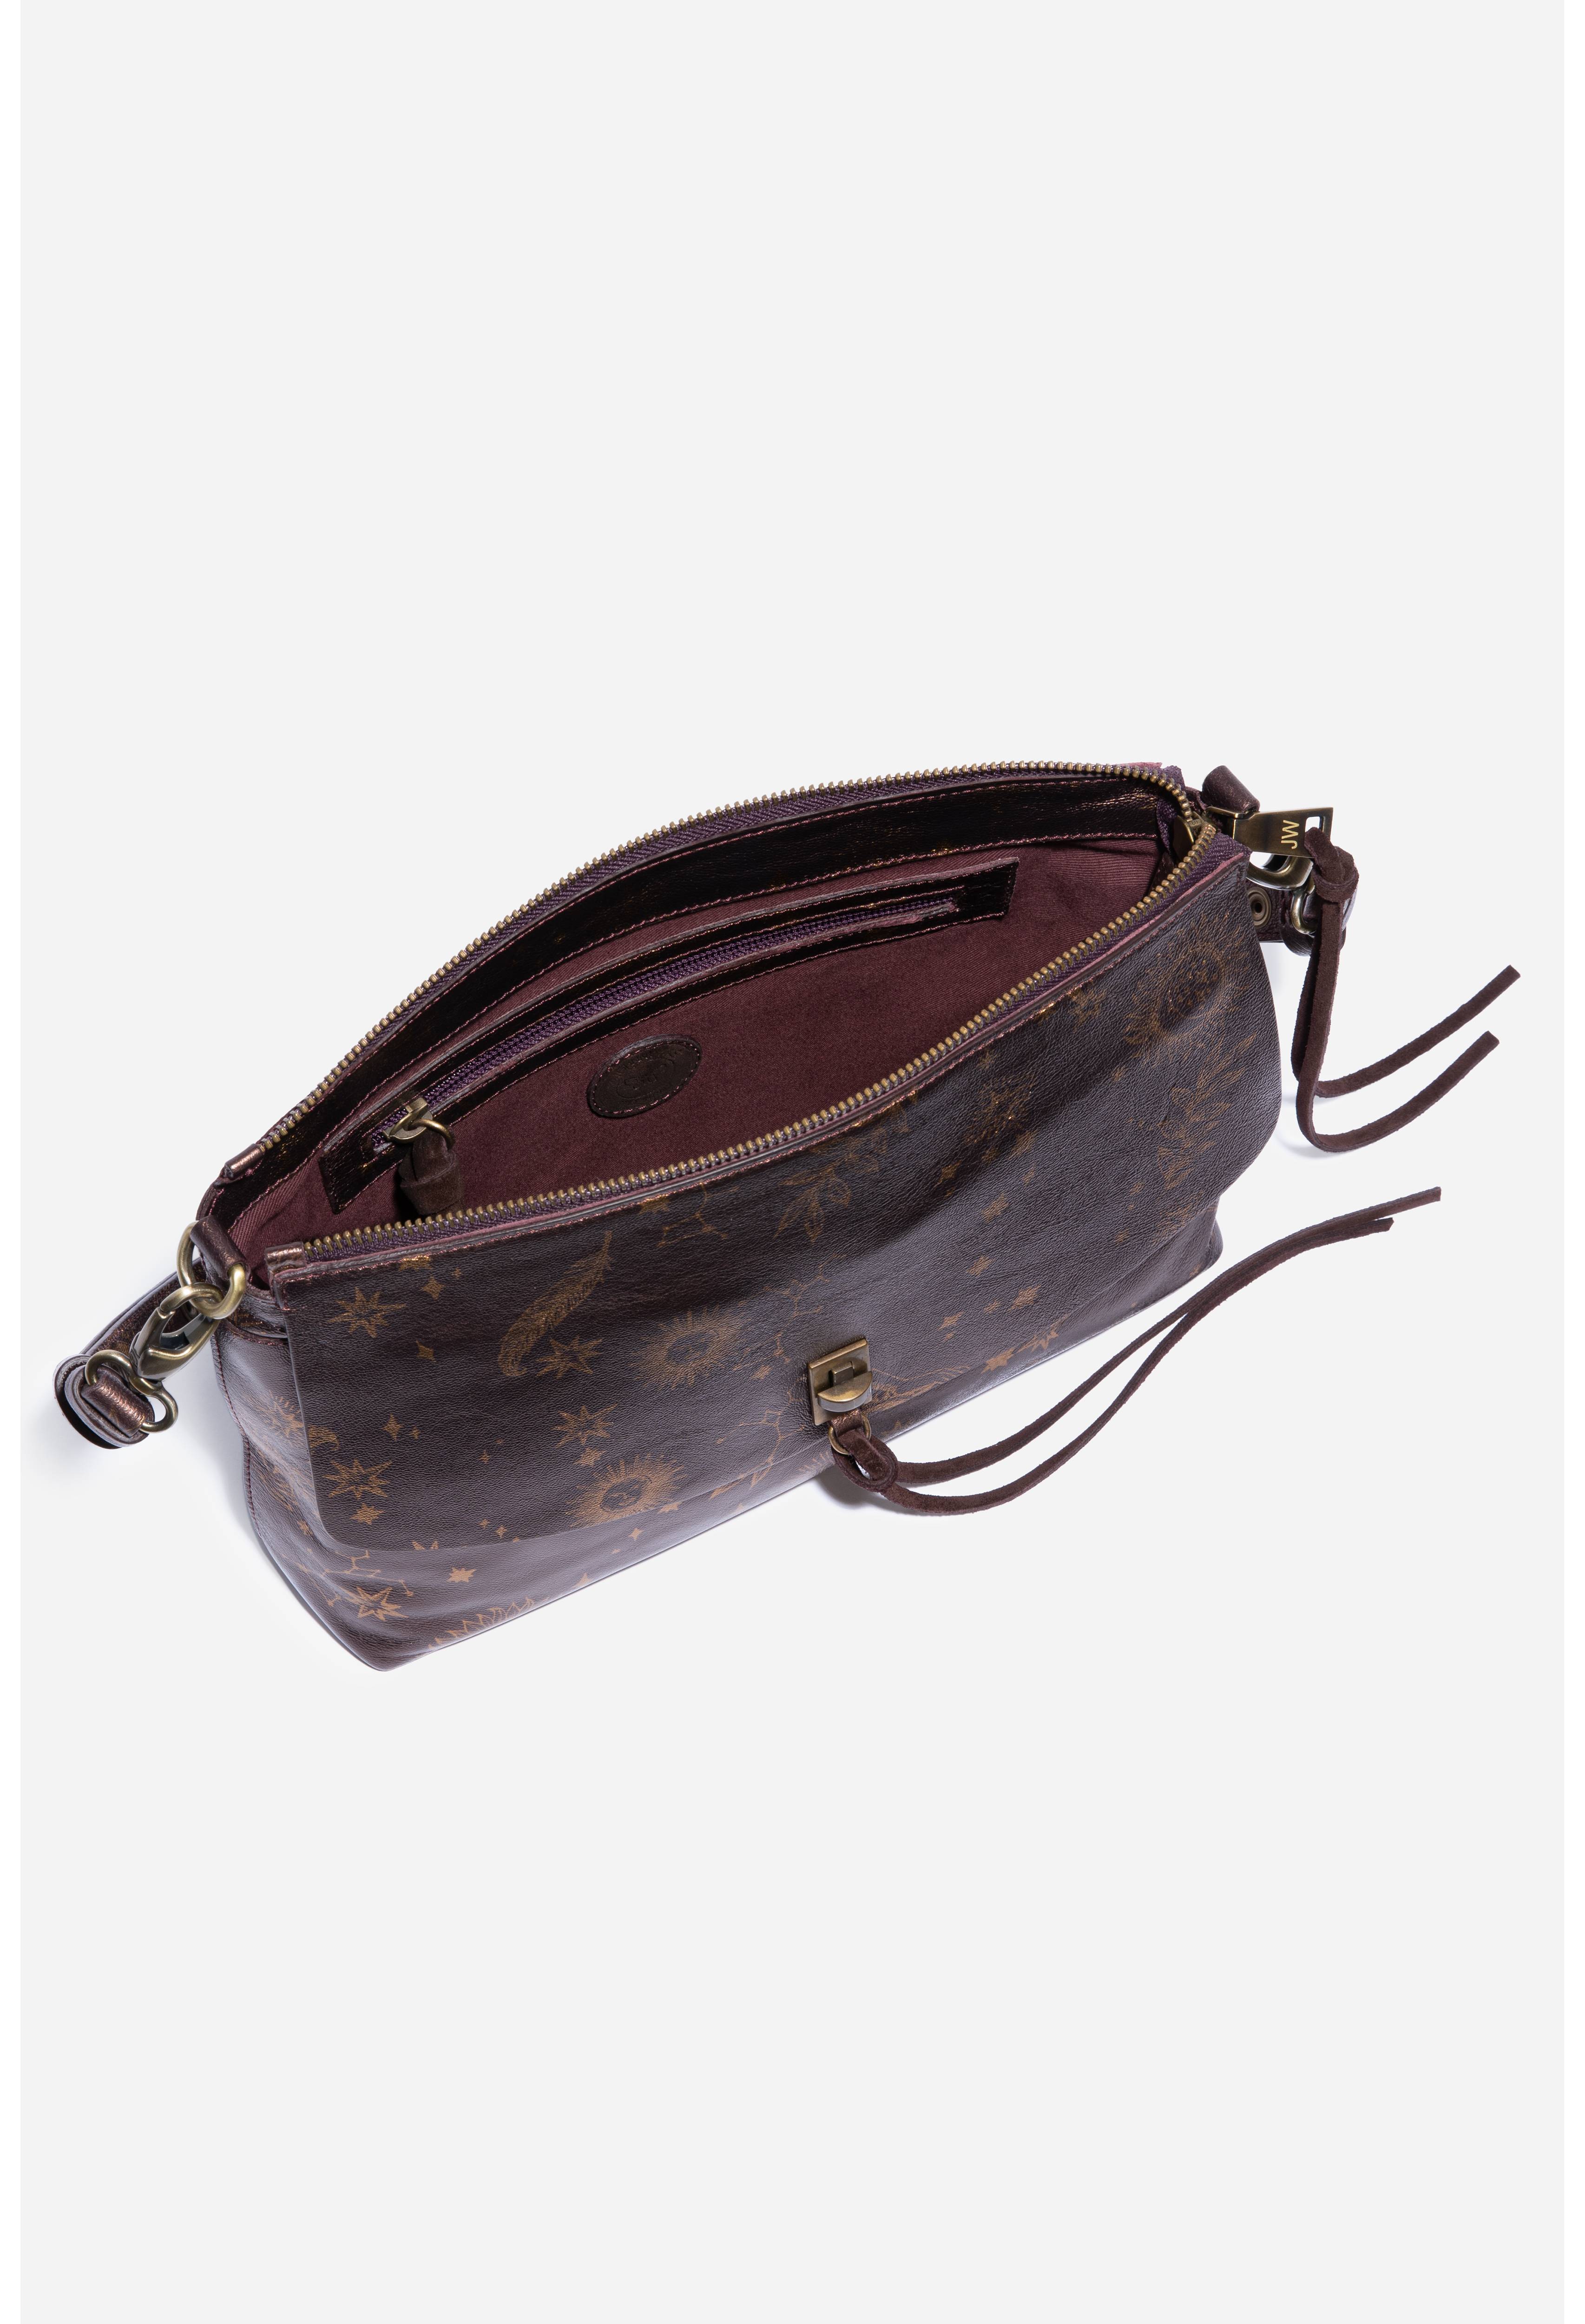 Women's Asteria Italian Leather Shoulder Bag by Johnny Was in Barolo